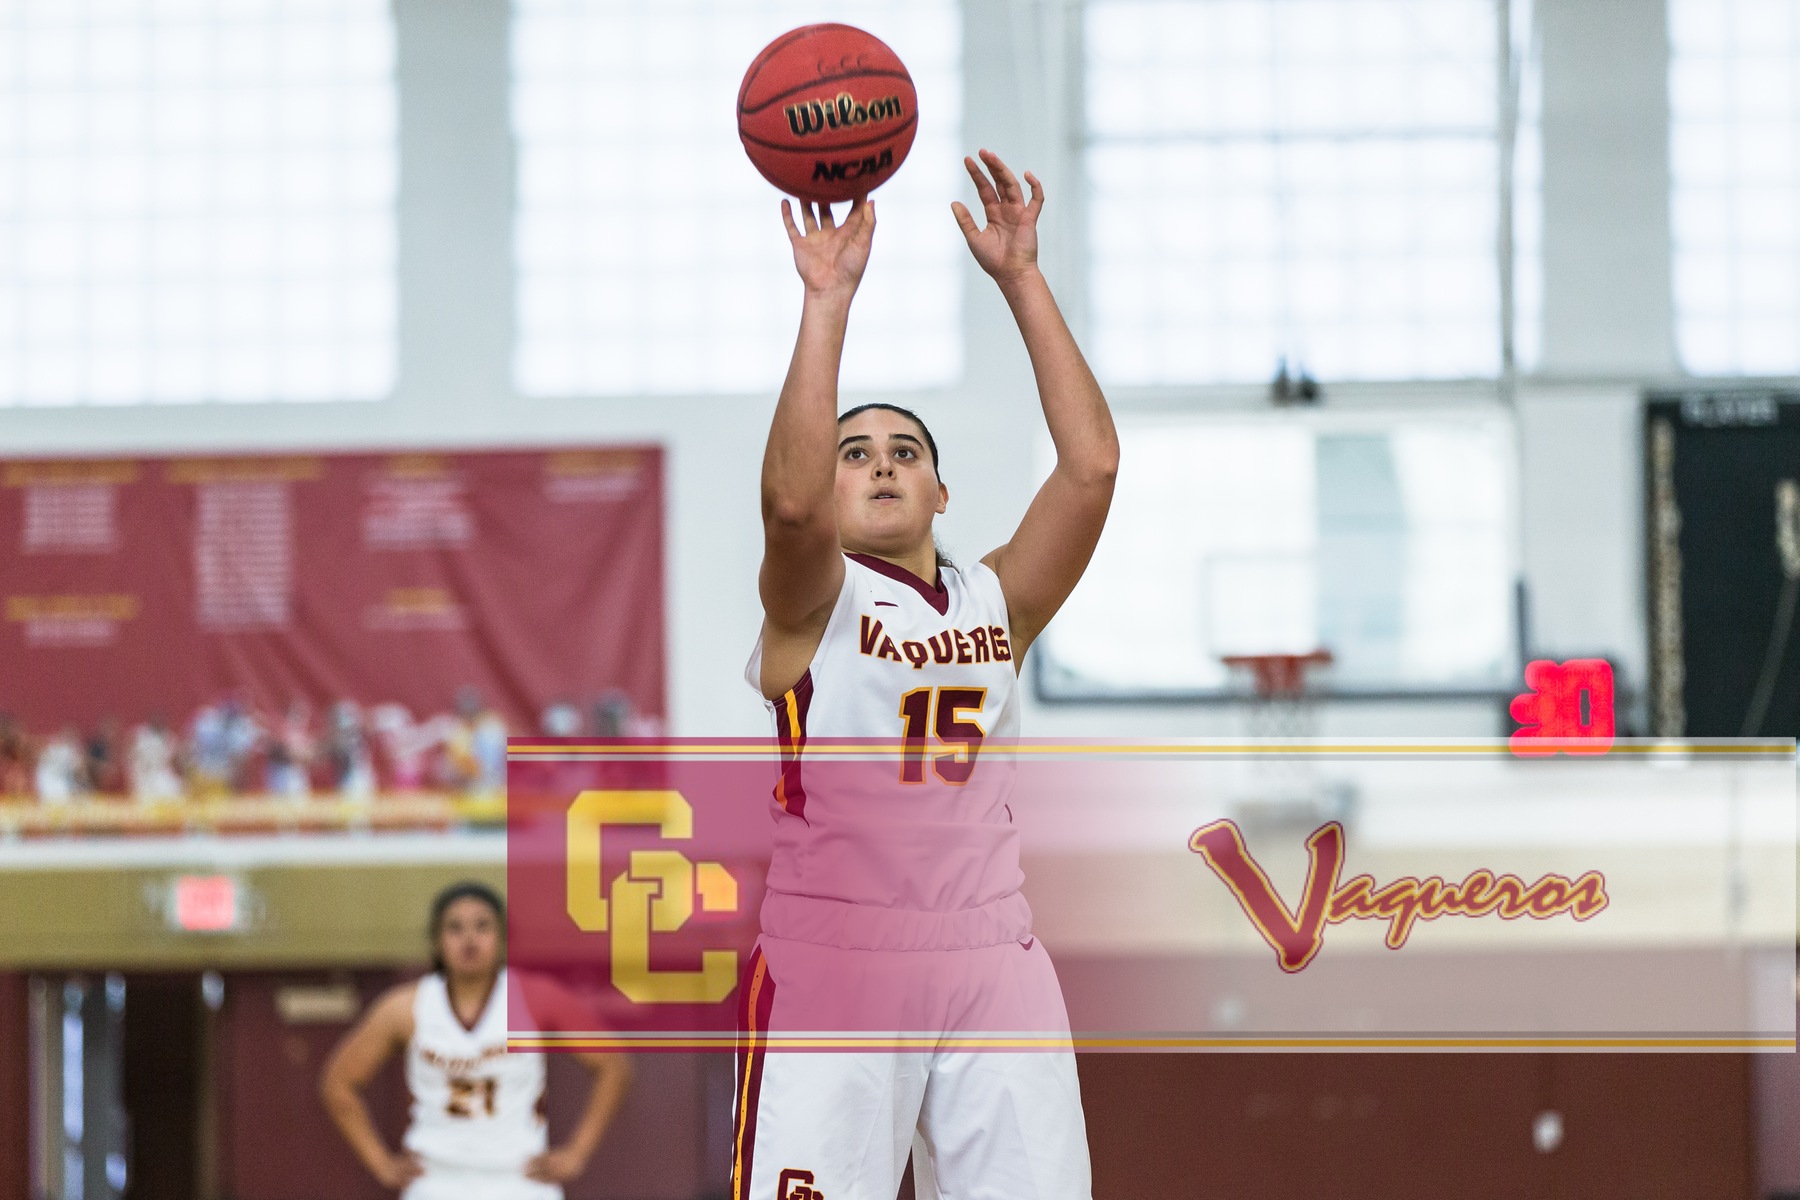 Fauria scores 15 to lead women ‘s basketball to 51-32 win over Victor Valley